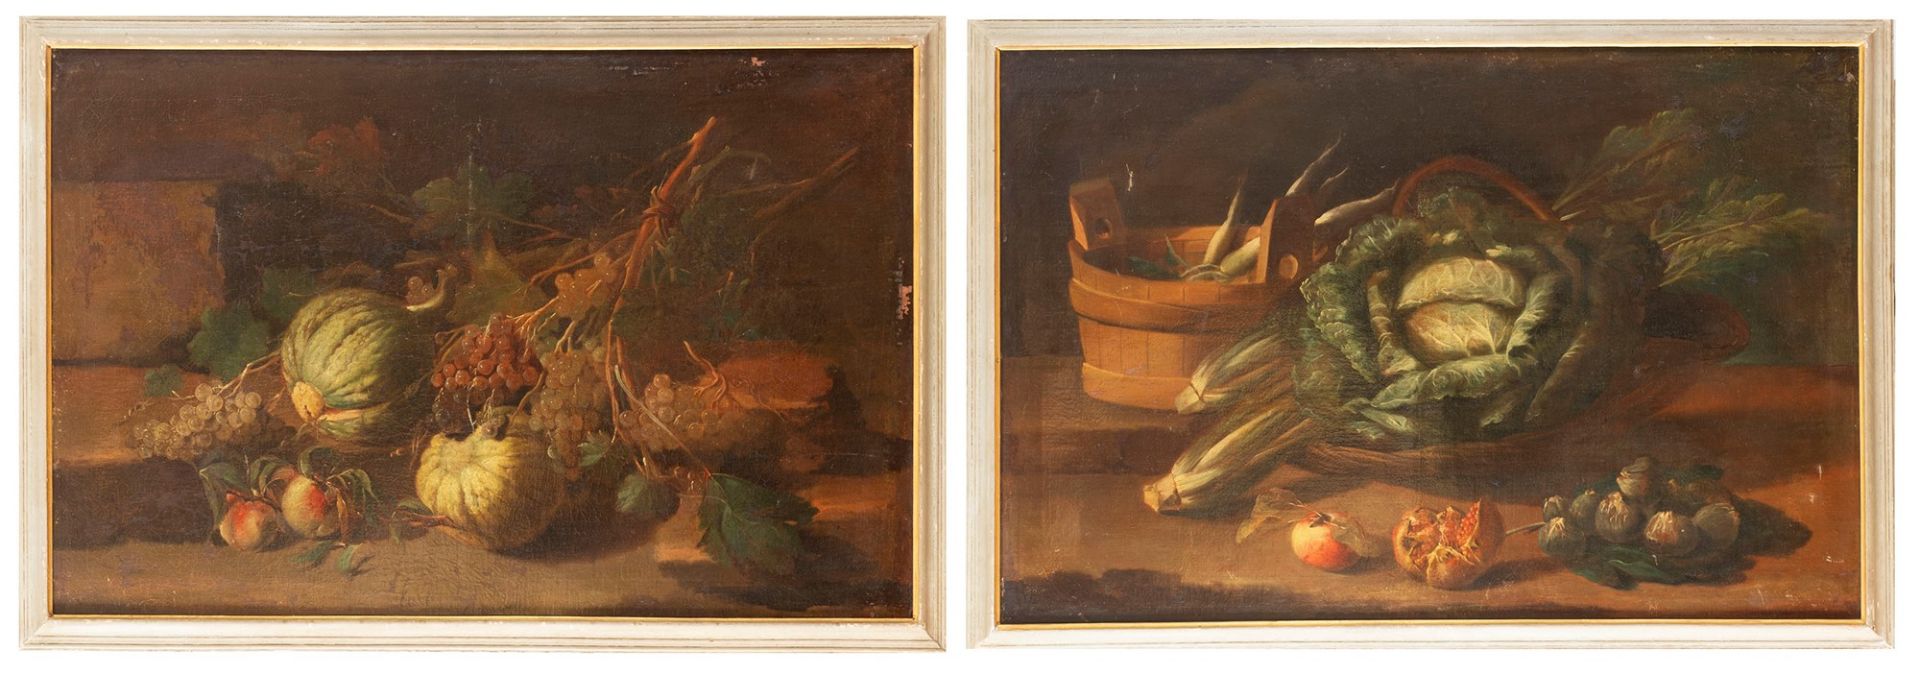 Emilian school, end of the eighteenth century - Two still lifes in a kitchen interior